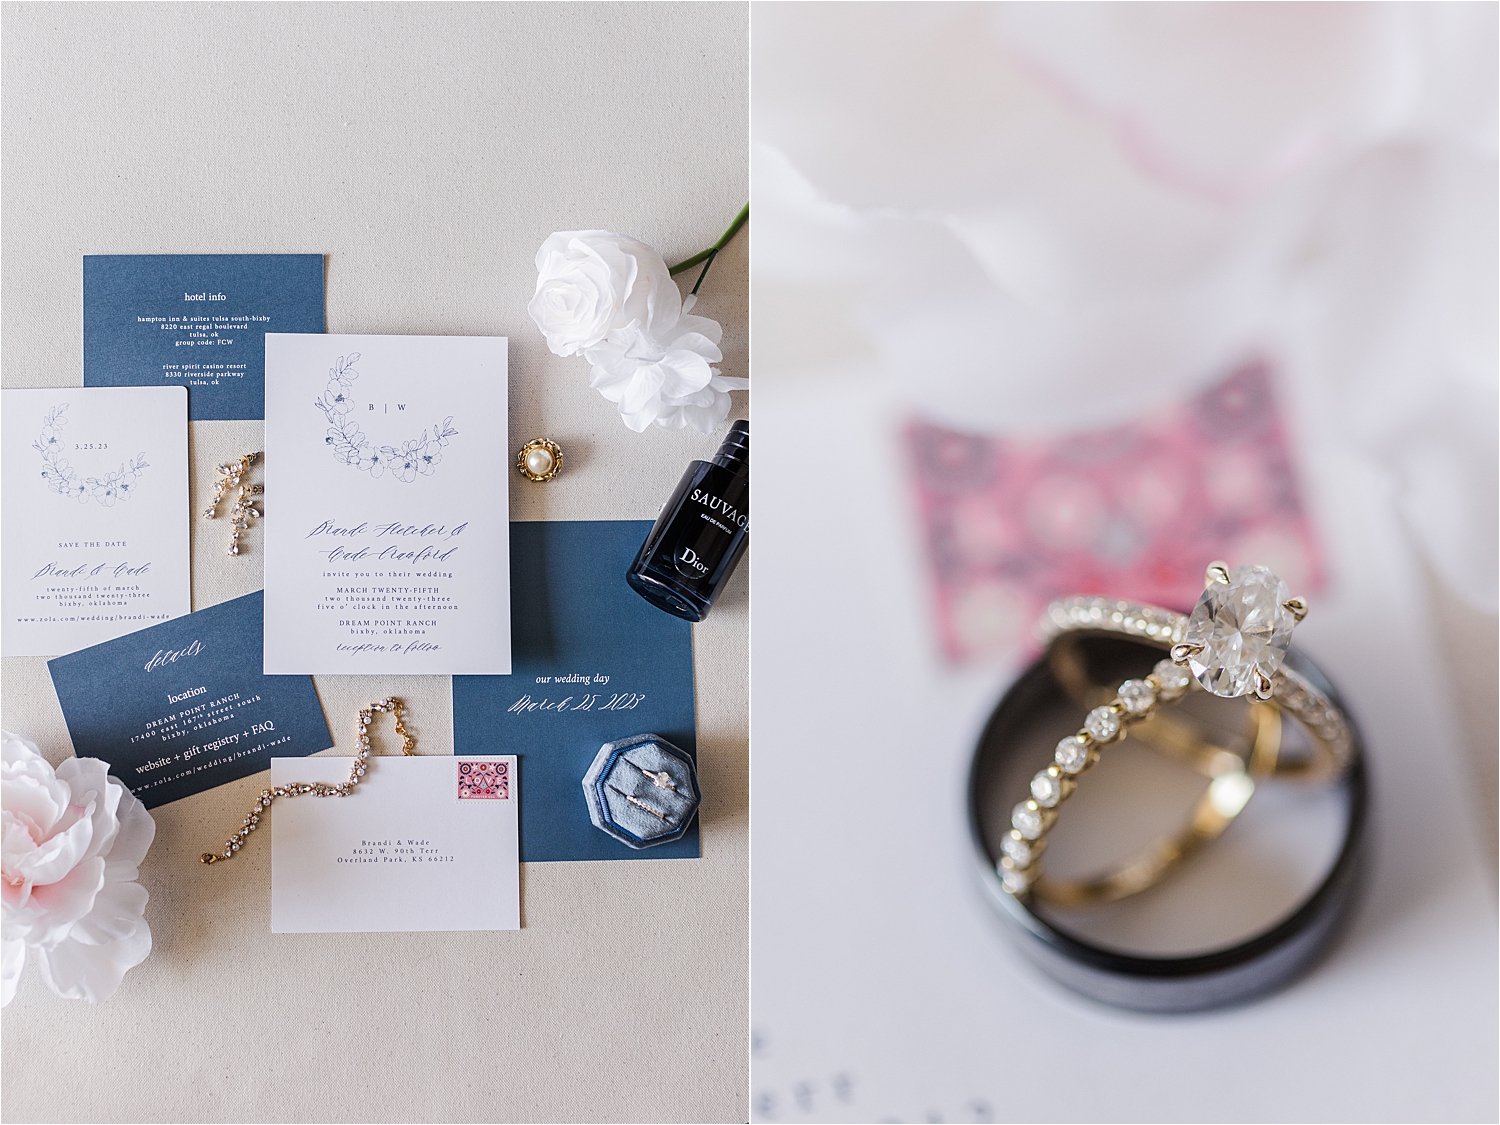 Invitation suite and wedding rings at a Dream Point Ranch Wedding.